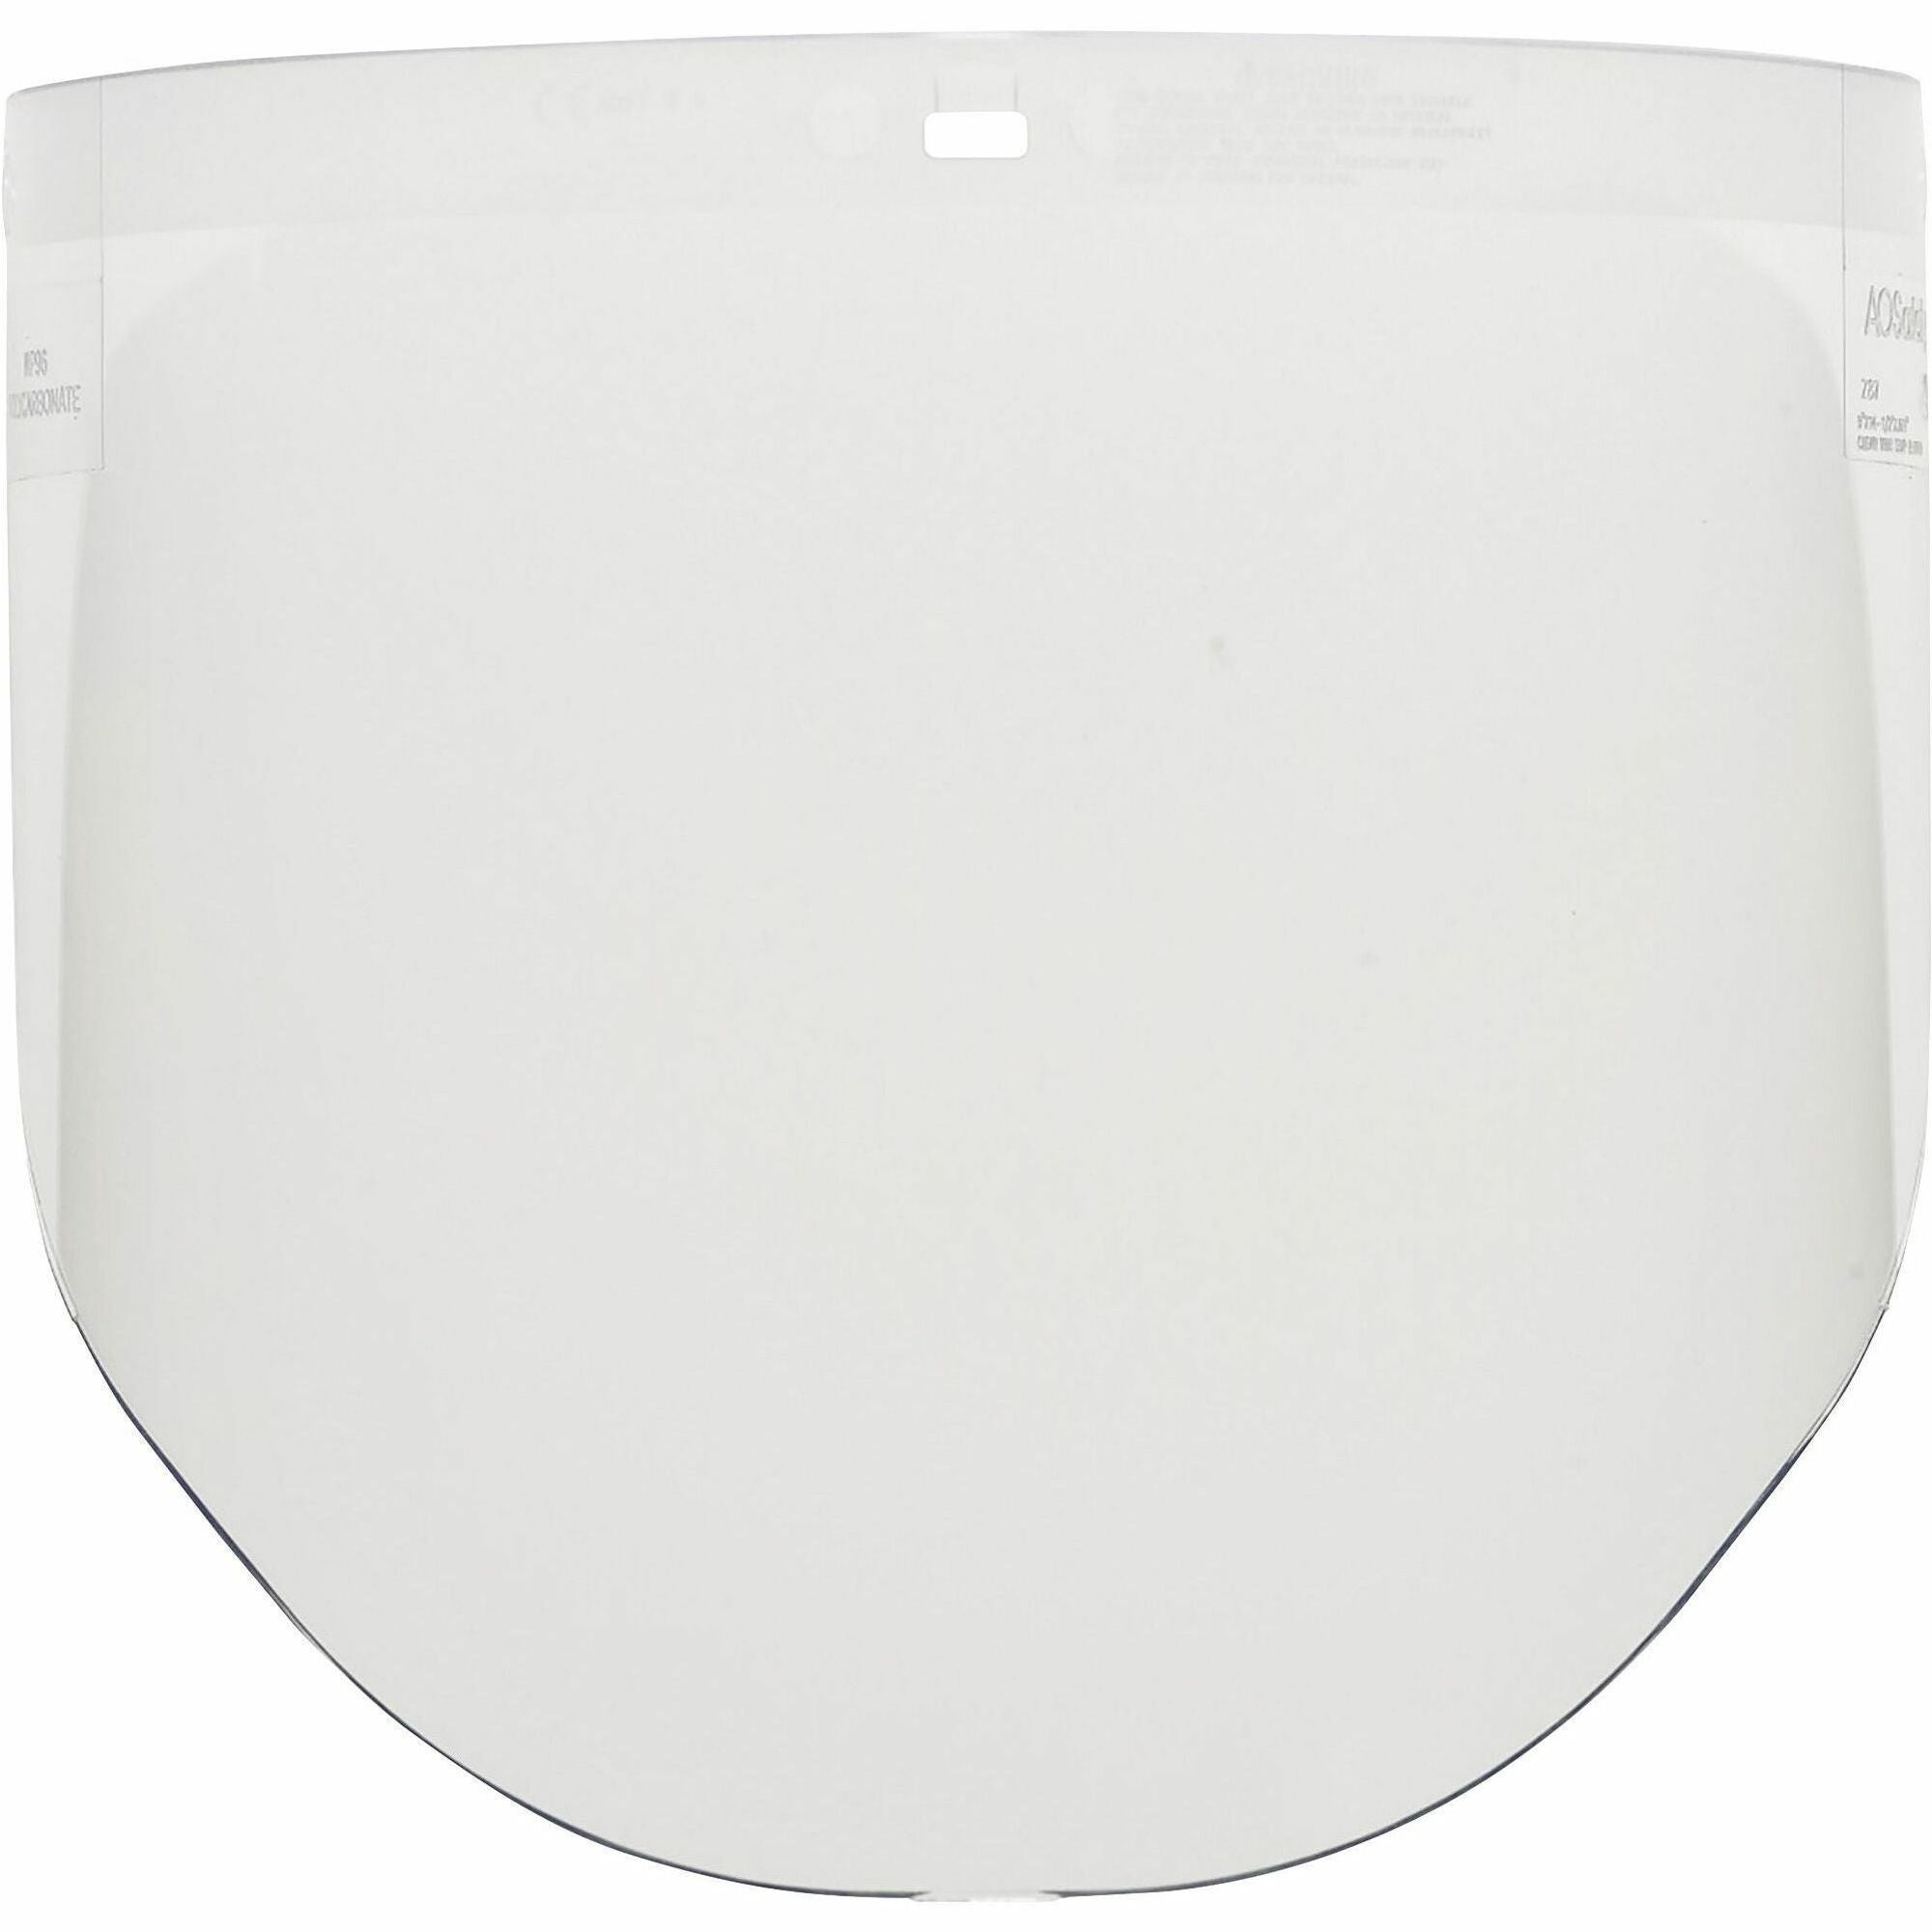 3m-w-series-face-shield-for-x5000-series-helmet-recommended-for-automotive-construction-sanitation-food-processing-manufacturing-infrastructure-industrial-maintenance-military-repair-machine-operation-mining--standard-size-head_mmmwp96 - 1